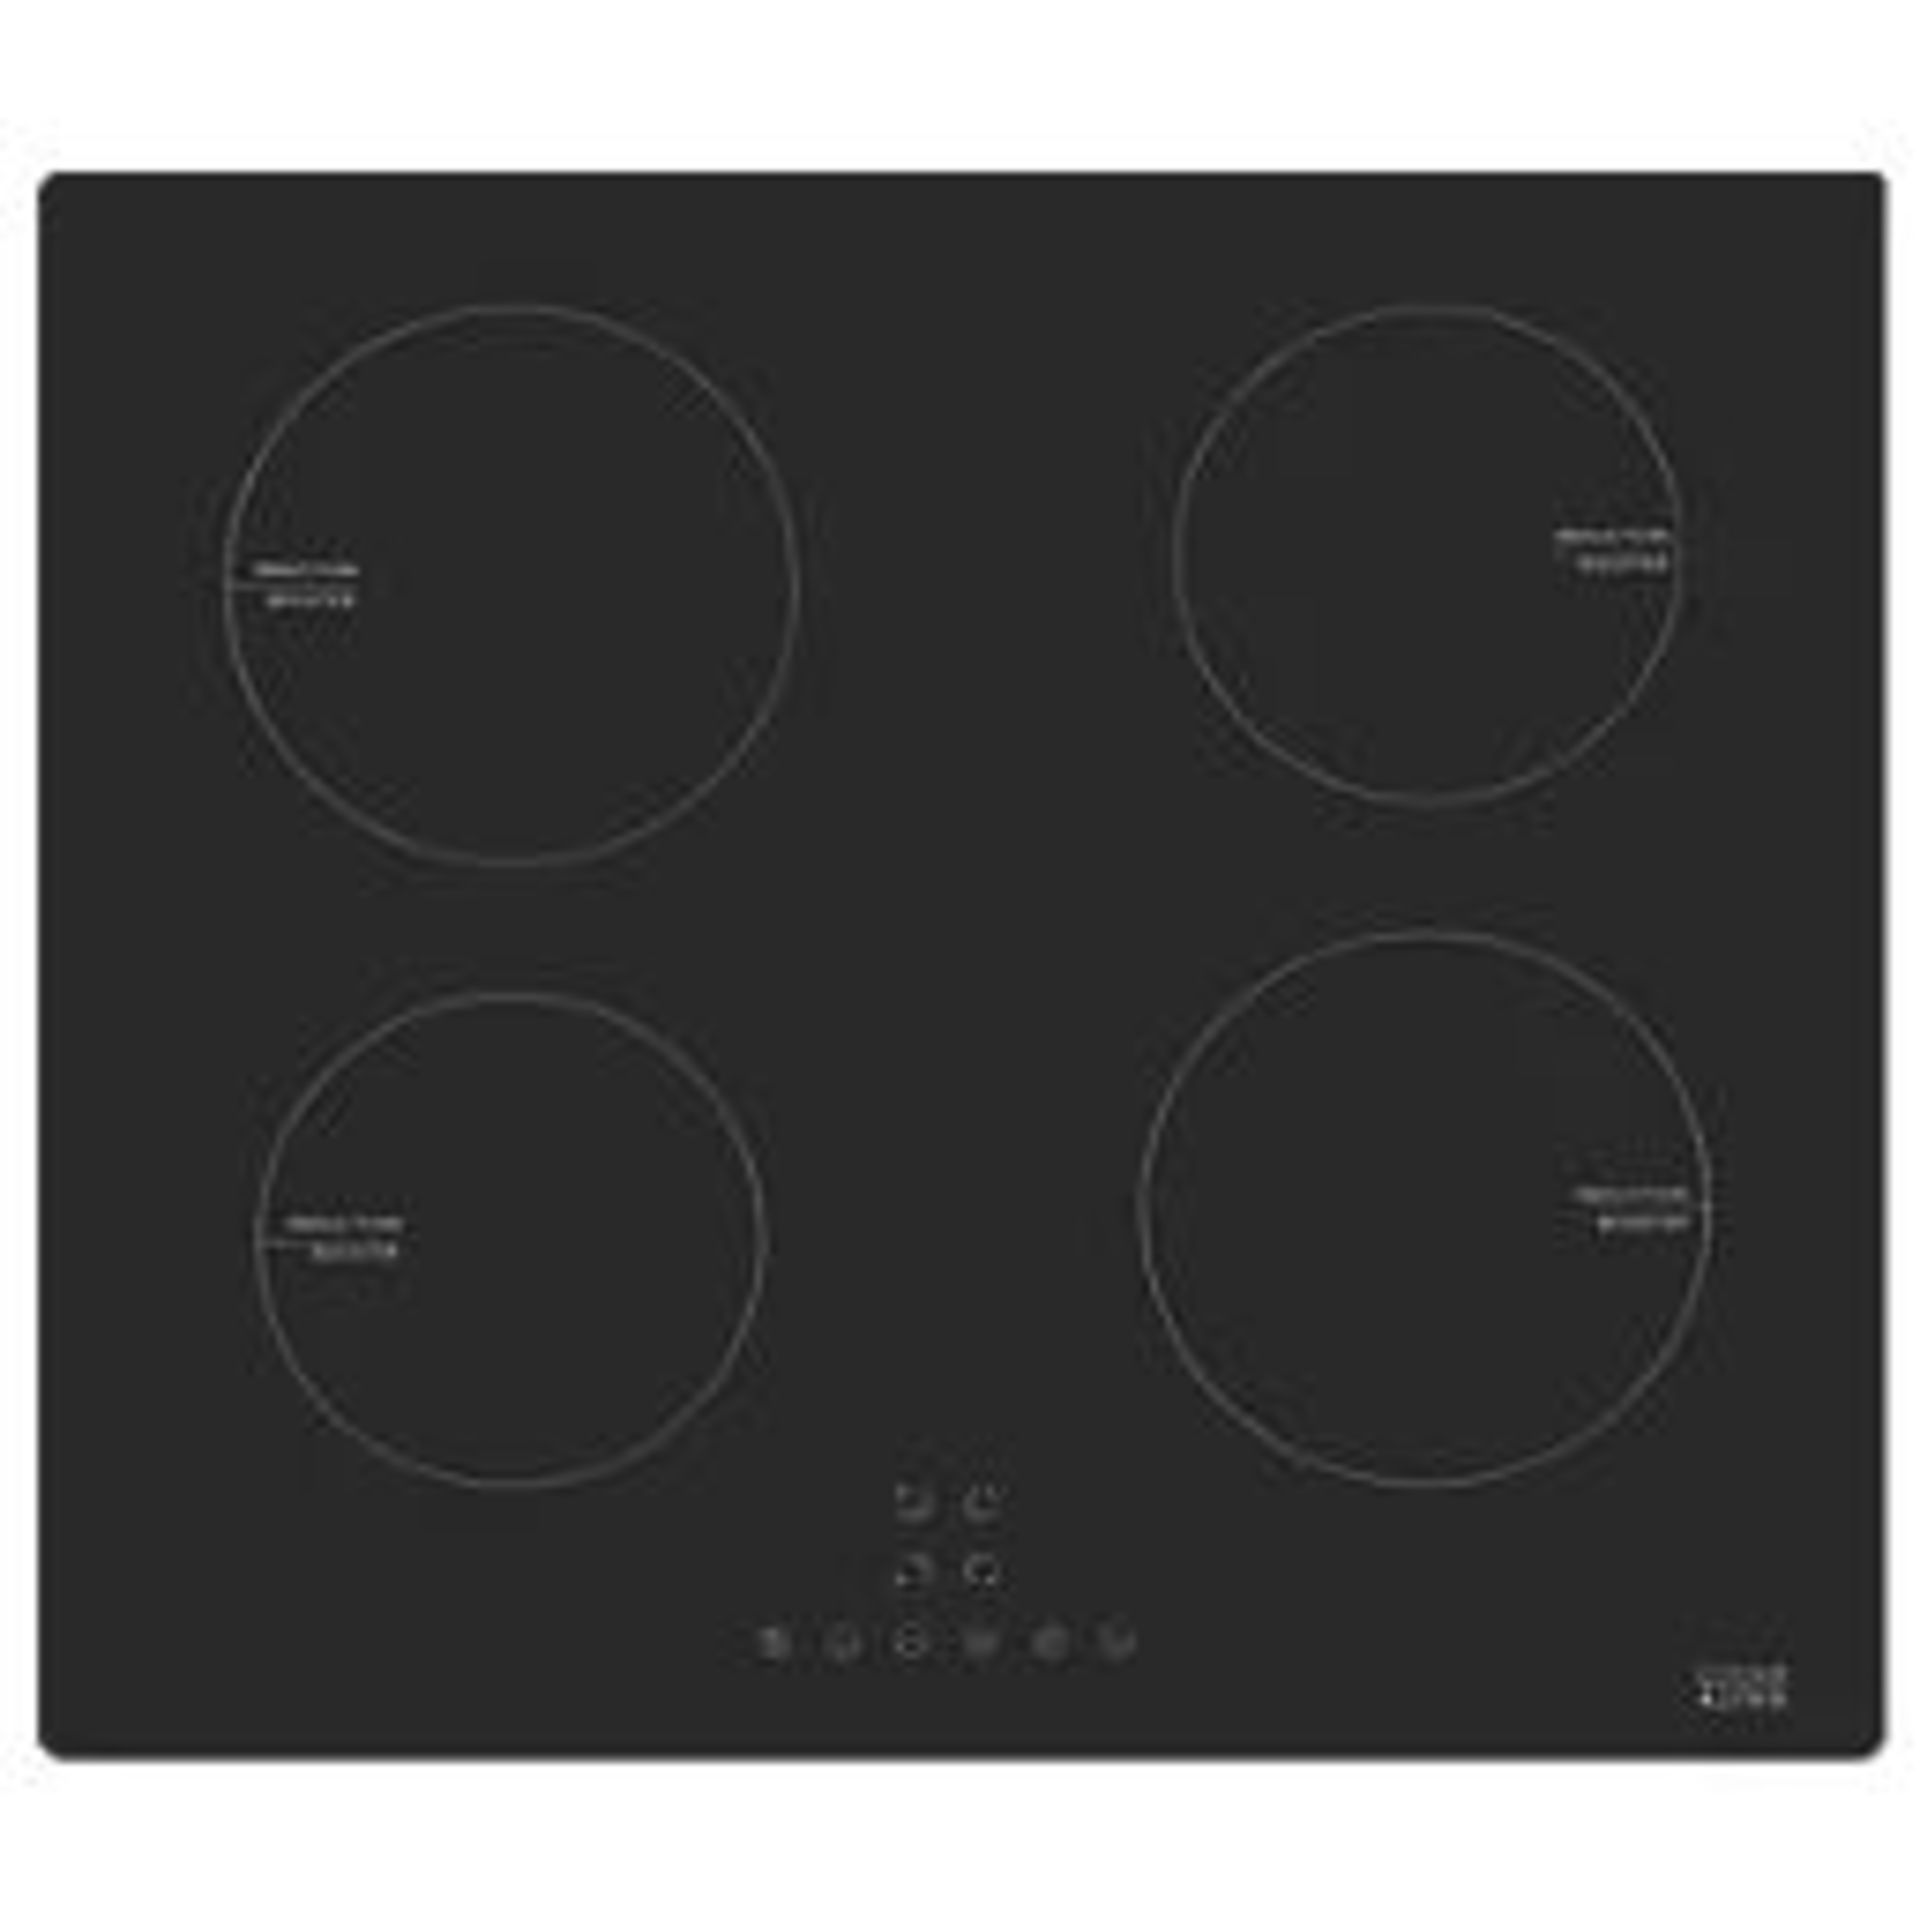 COOKE & LEWIS INDUCTION HOB BLACK 59CM. - R19. Induction hob heats the surface of the pan, not the